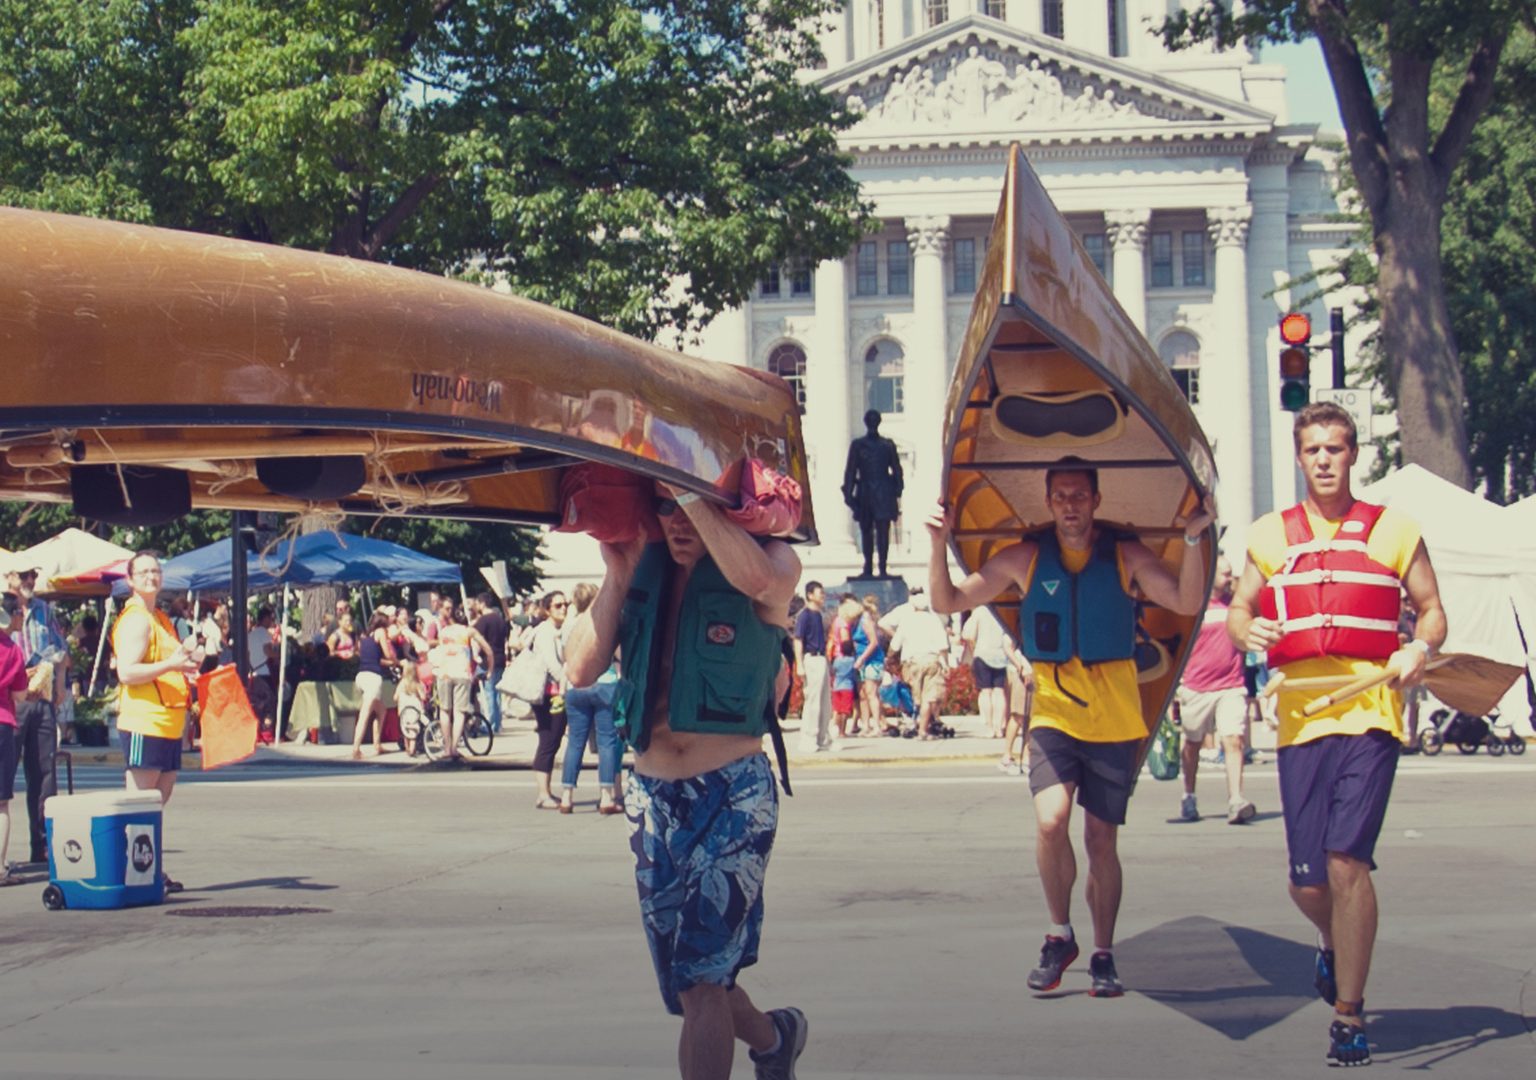 Race participants carrying canoes over their heads running across street with Capitol building in background